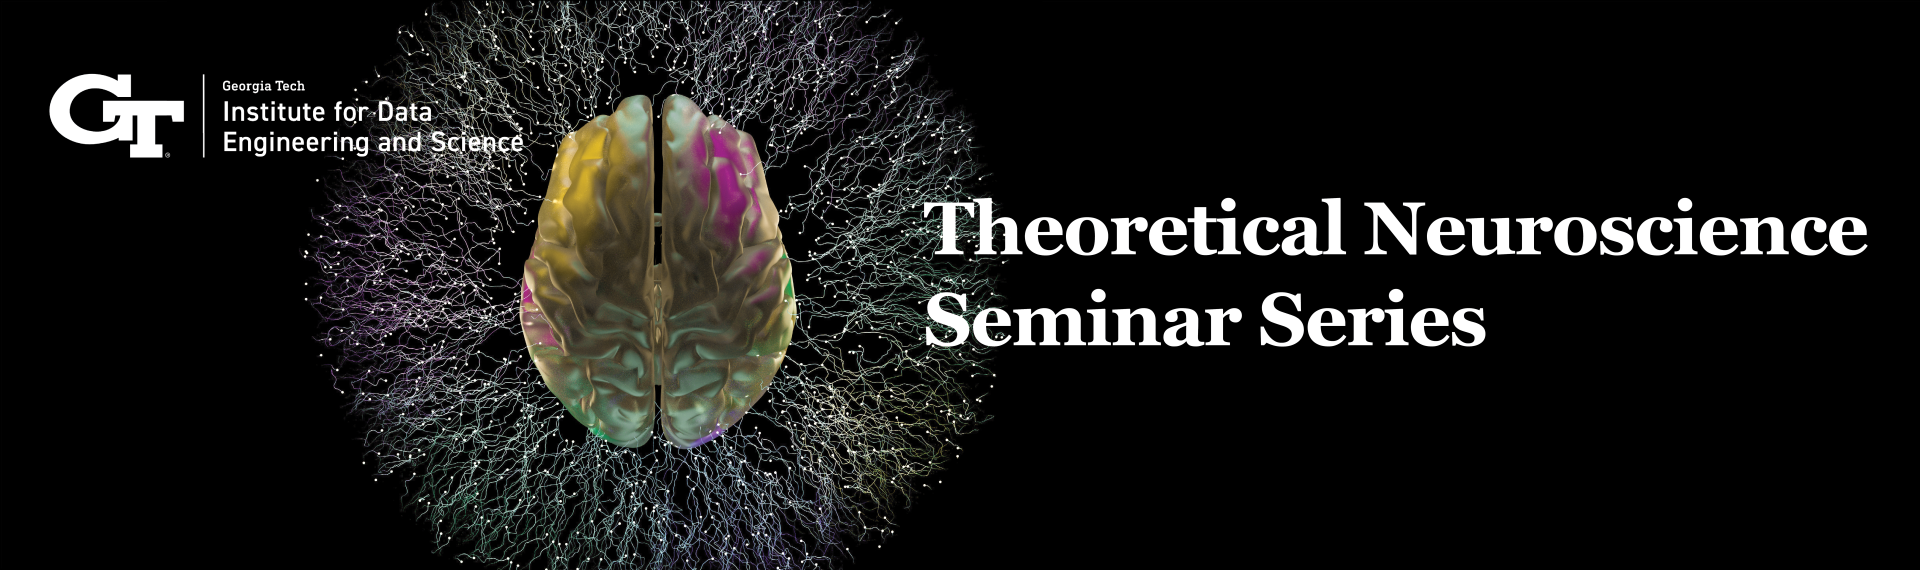 Theoretical Neuroscience Seminar Series Graphic with Neurons and Brain Imaging